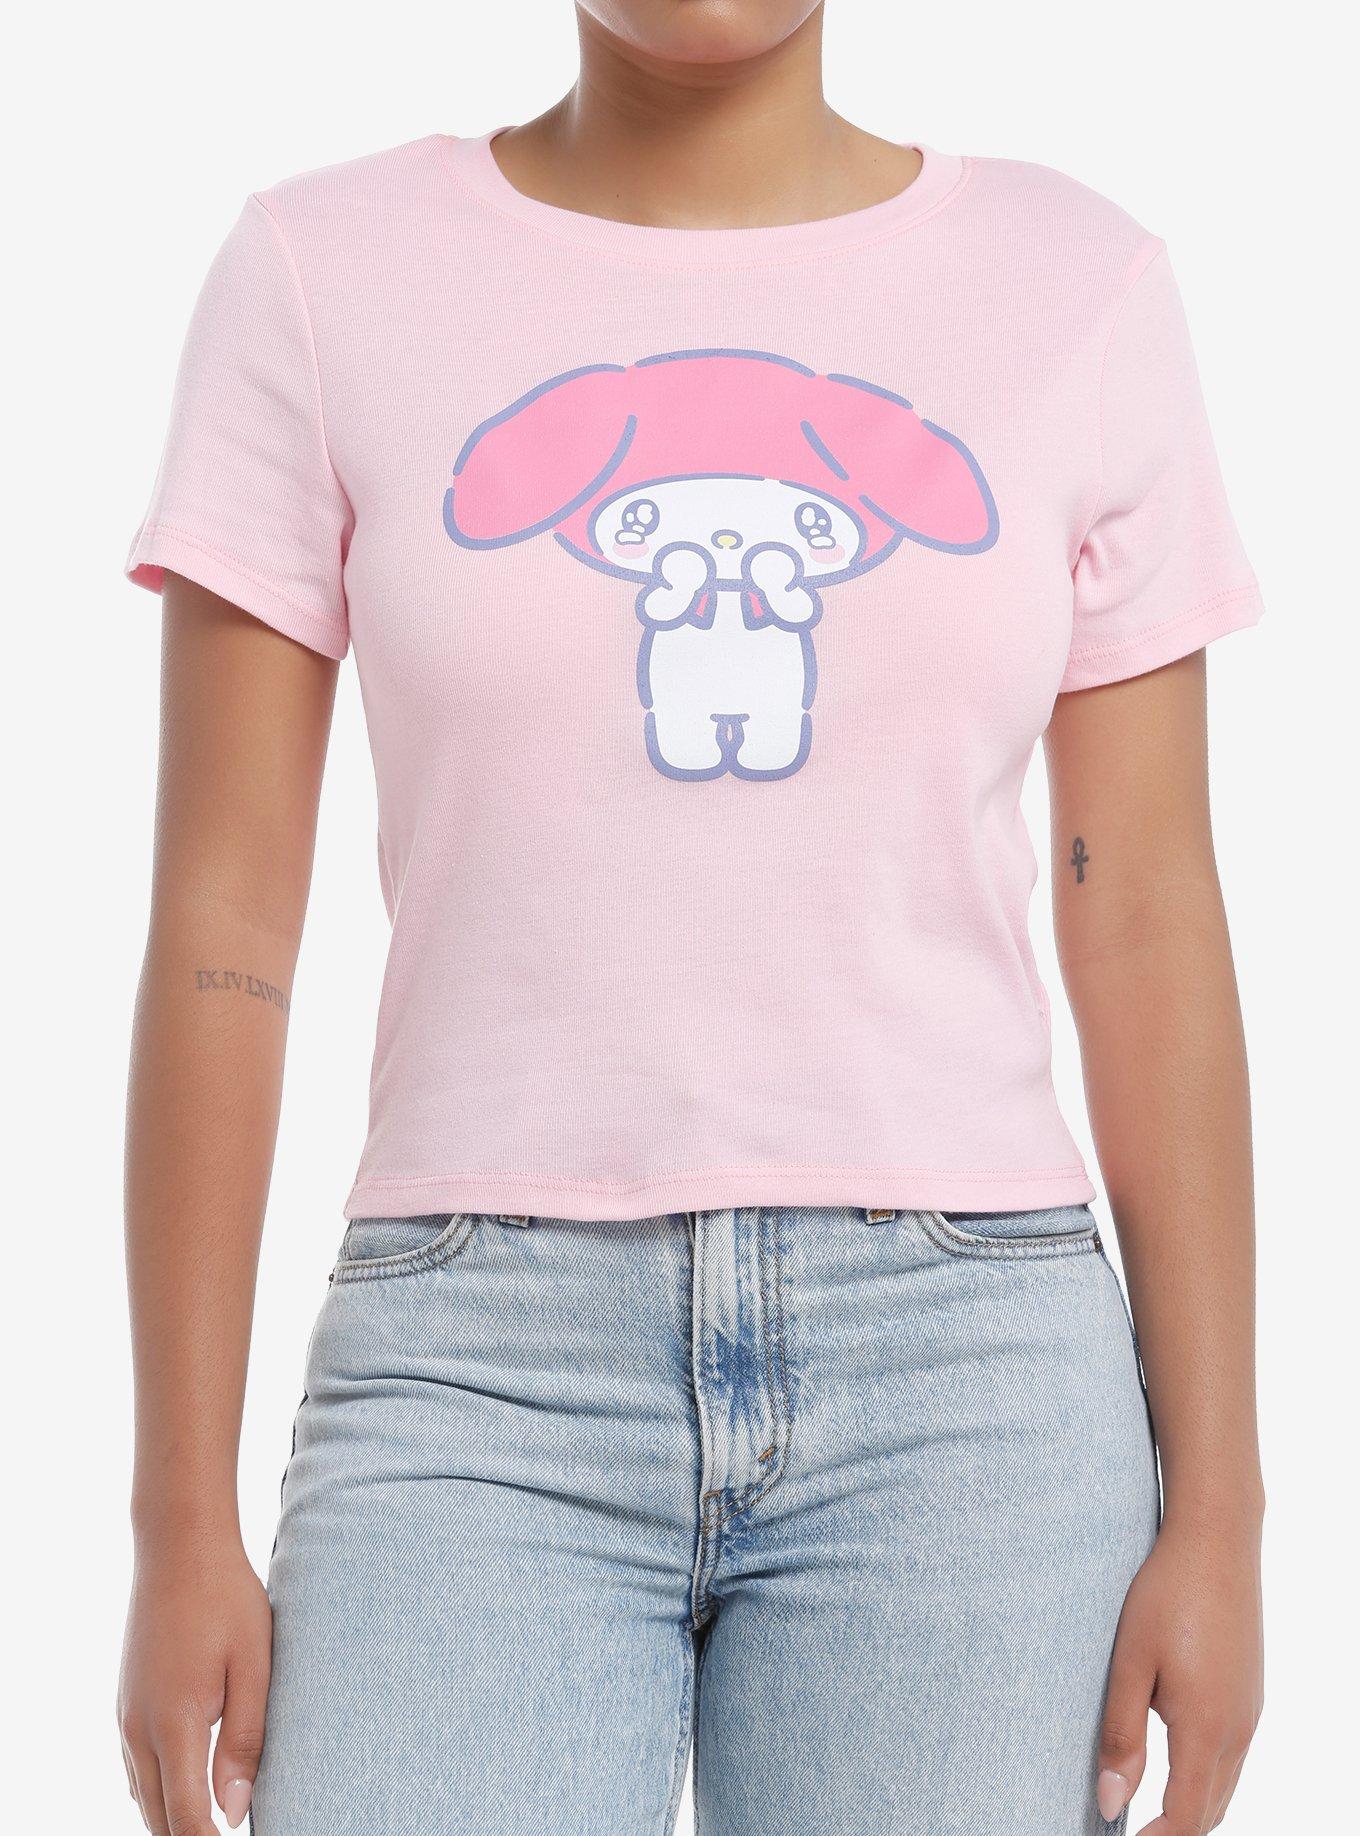 My Melodhy Crying Girls Baby T-Shirt, MULTI, hi-res